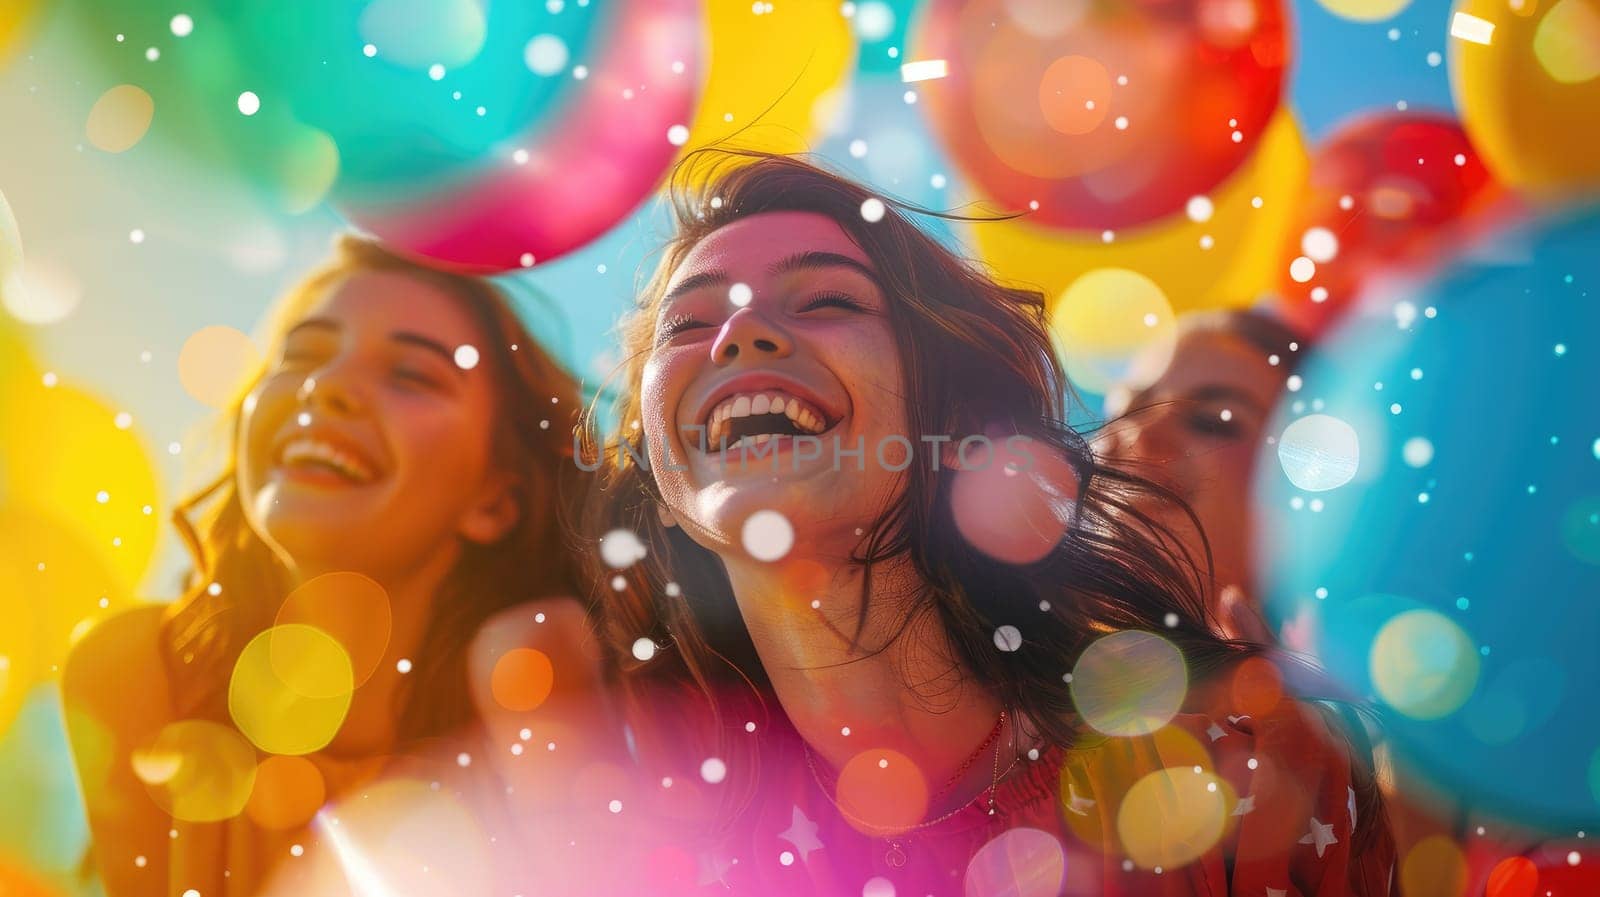 A joyful Friendship Day banner with friends captured in a moment of shared laughter, Celebrating Friendship Day.